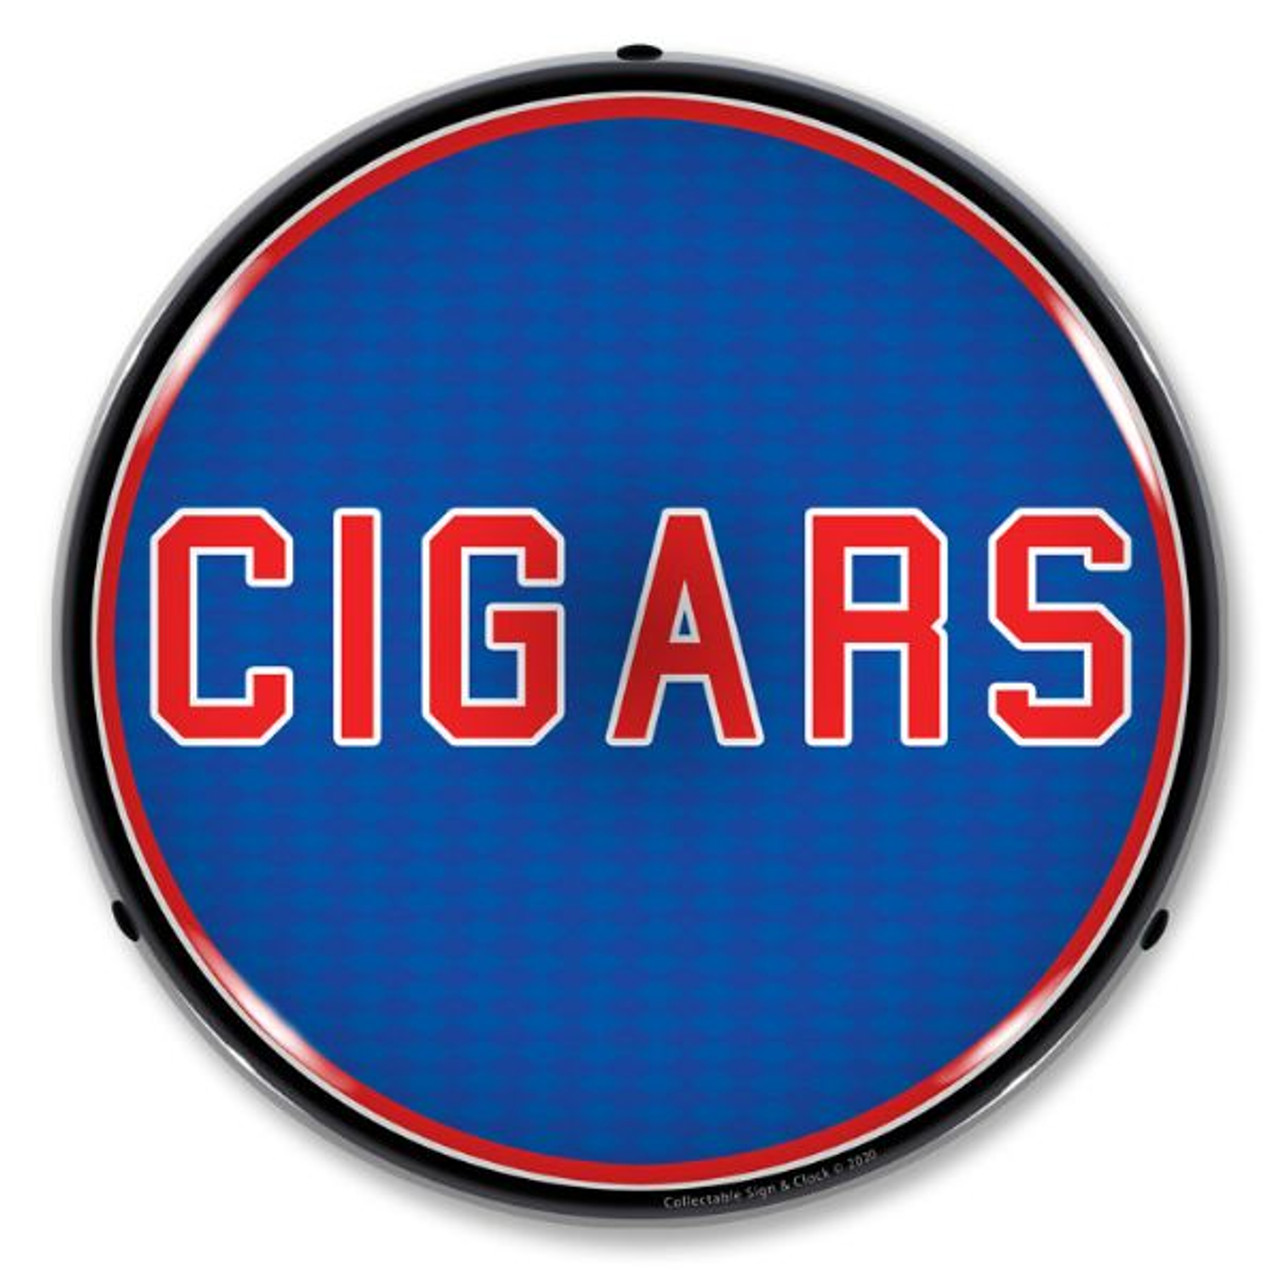 Cigars LED Lighted Business Sign 14 x 14 Inches